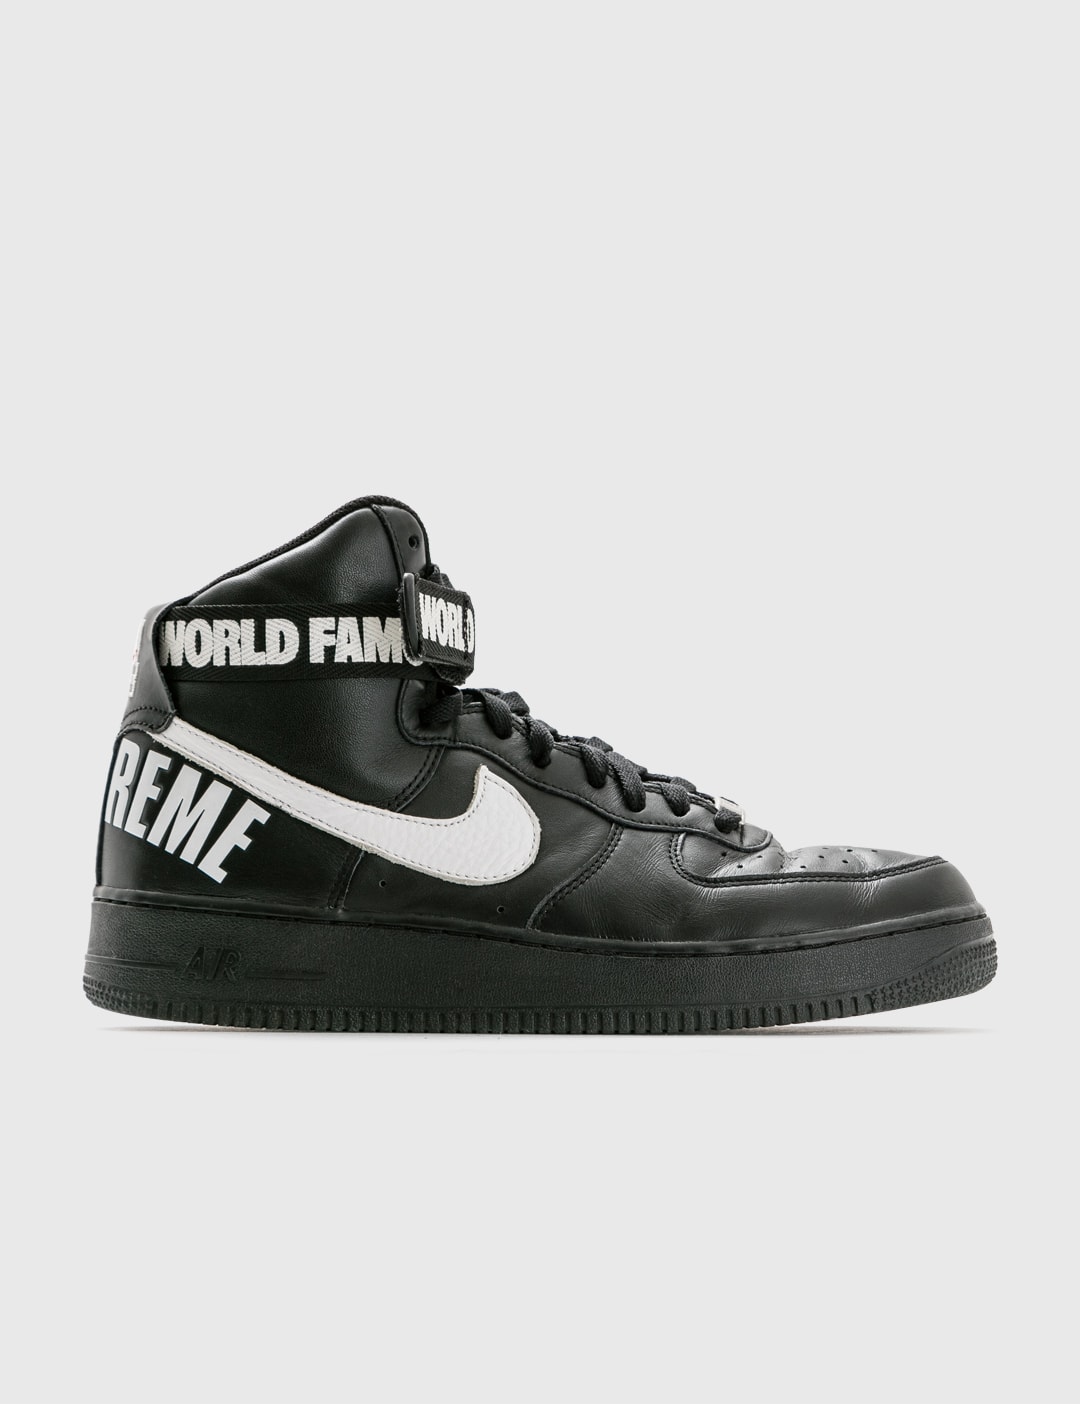 Verandering Bestrooi Rafflesia Arnoldi Nike - Nike Air Force 1 High Supreme World Famous Black | HBX - Globally  Curated Fashion and Lifestyle by Hypebeast